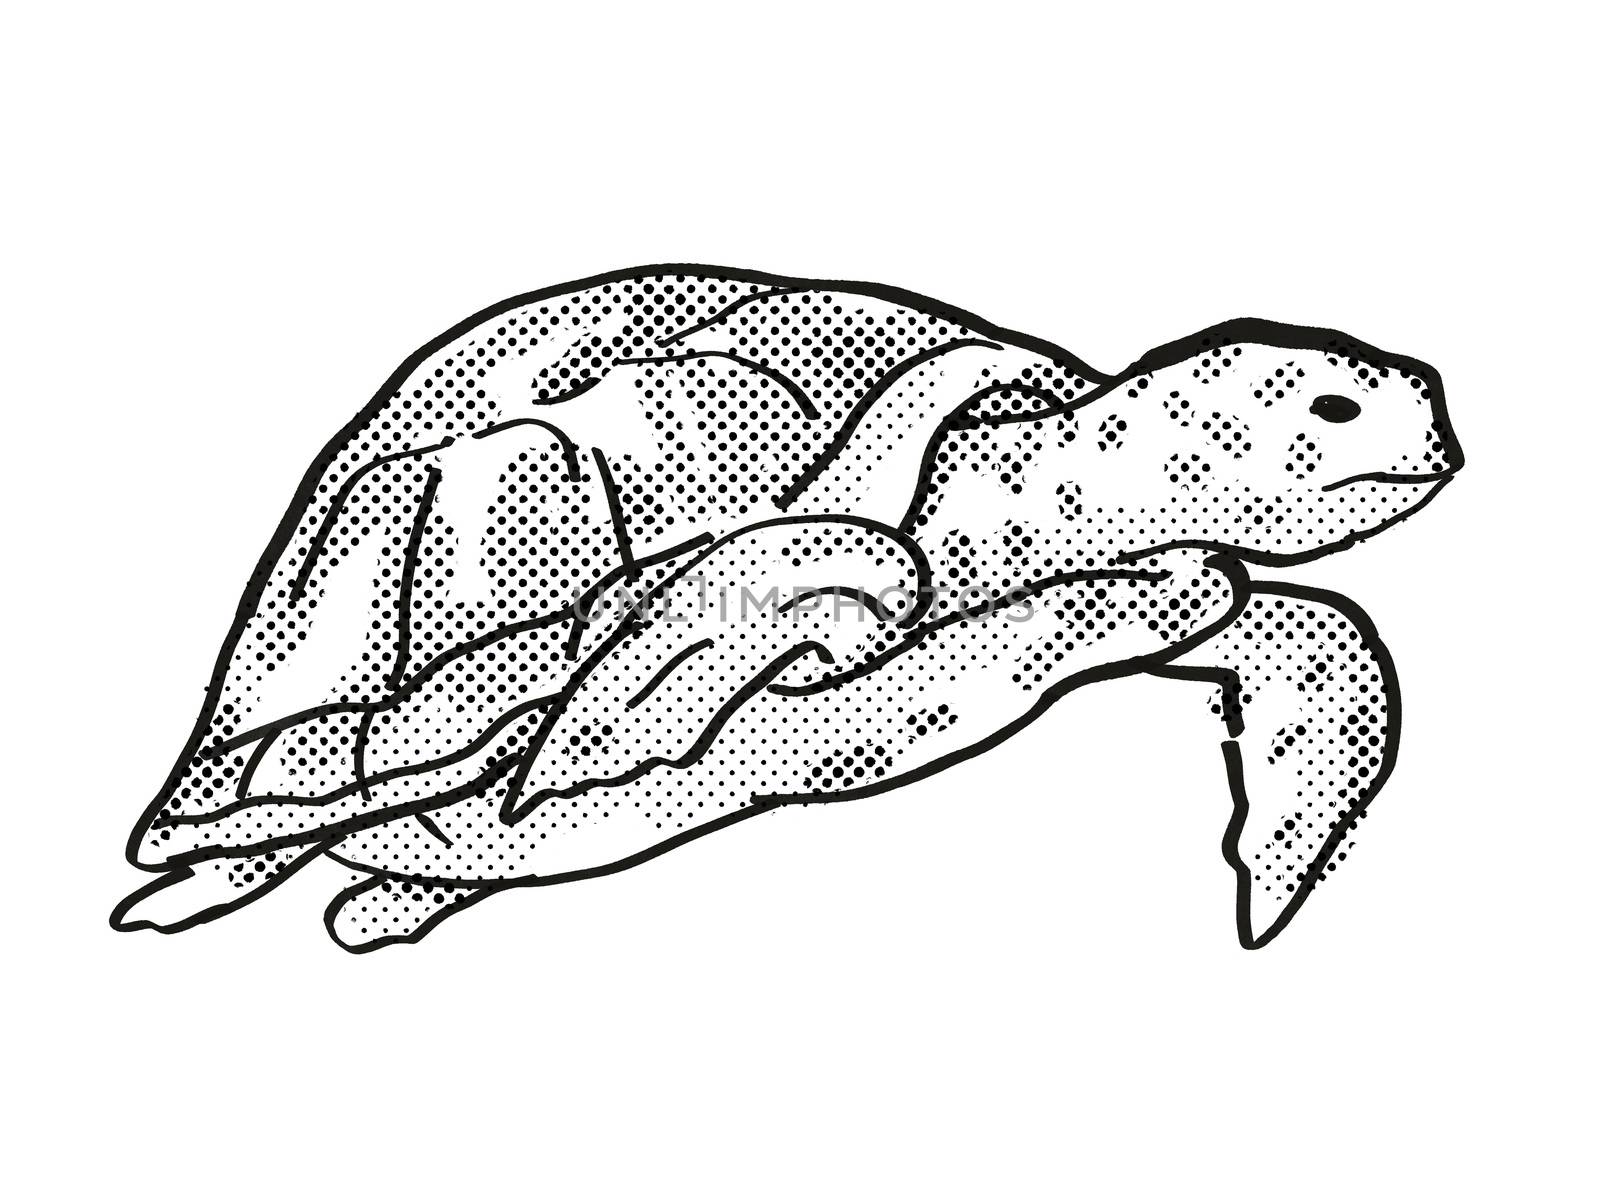 Retro cartoon line drawing style drawing of a Green Sea Turtle, an endangered wildlife species on isolated background done in black and white full body.